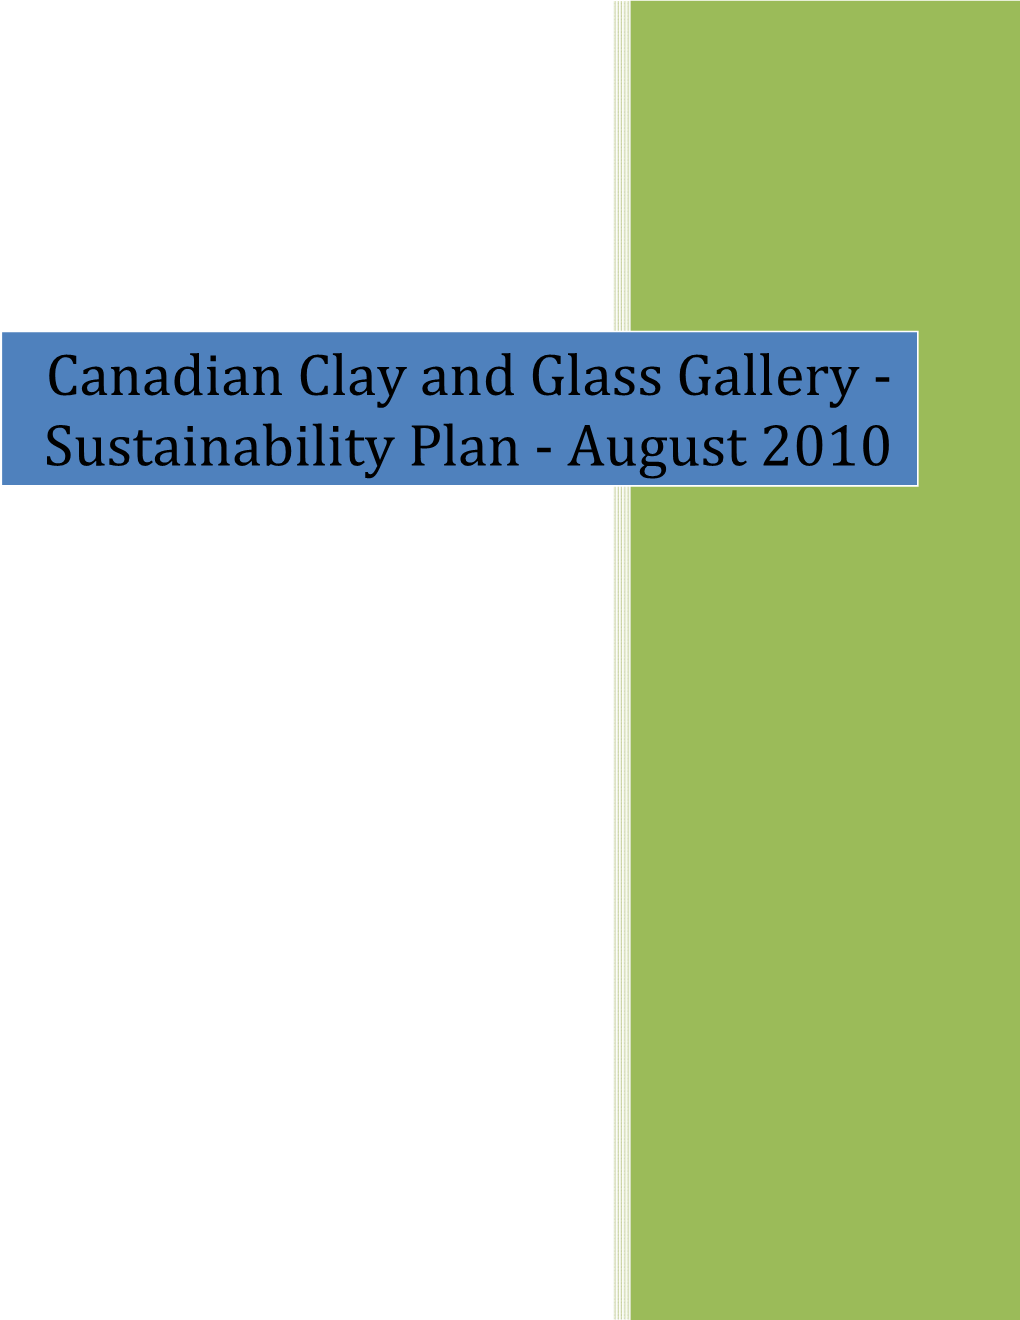 Sustainability Plan - August 2010